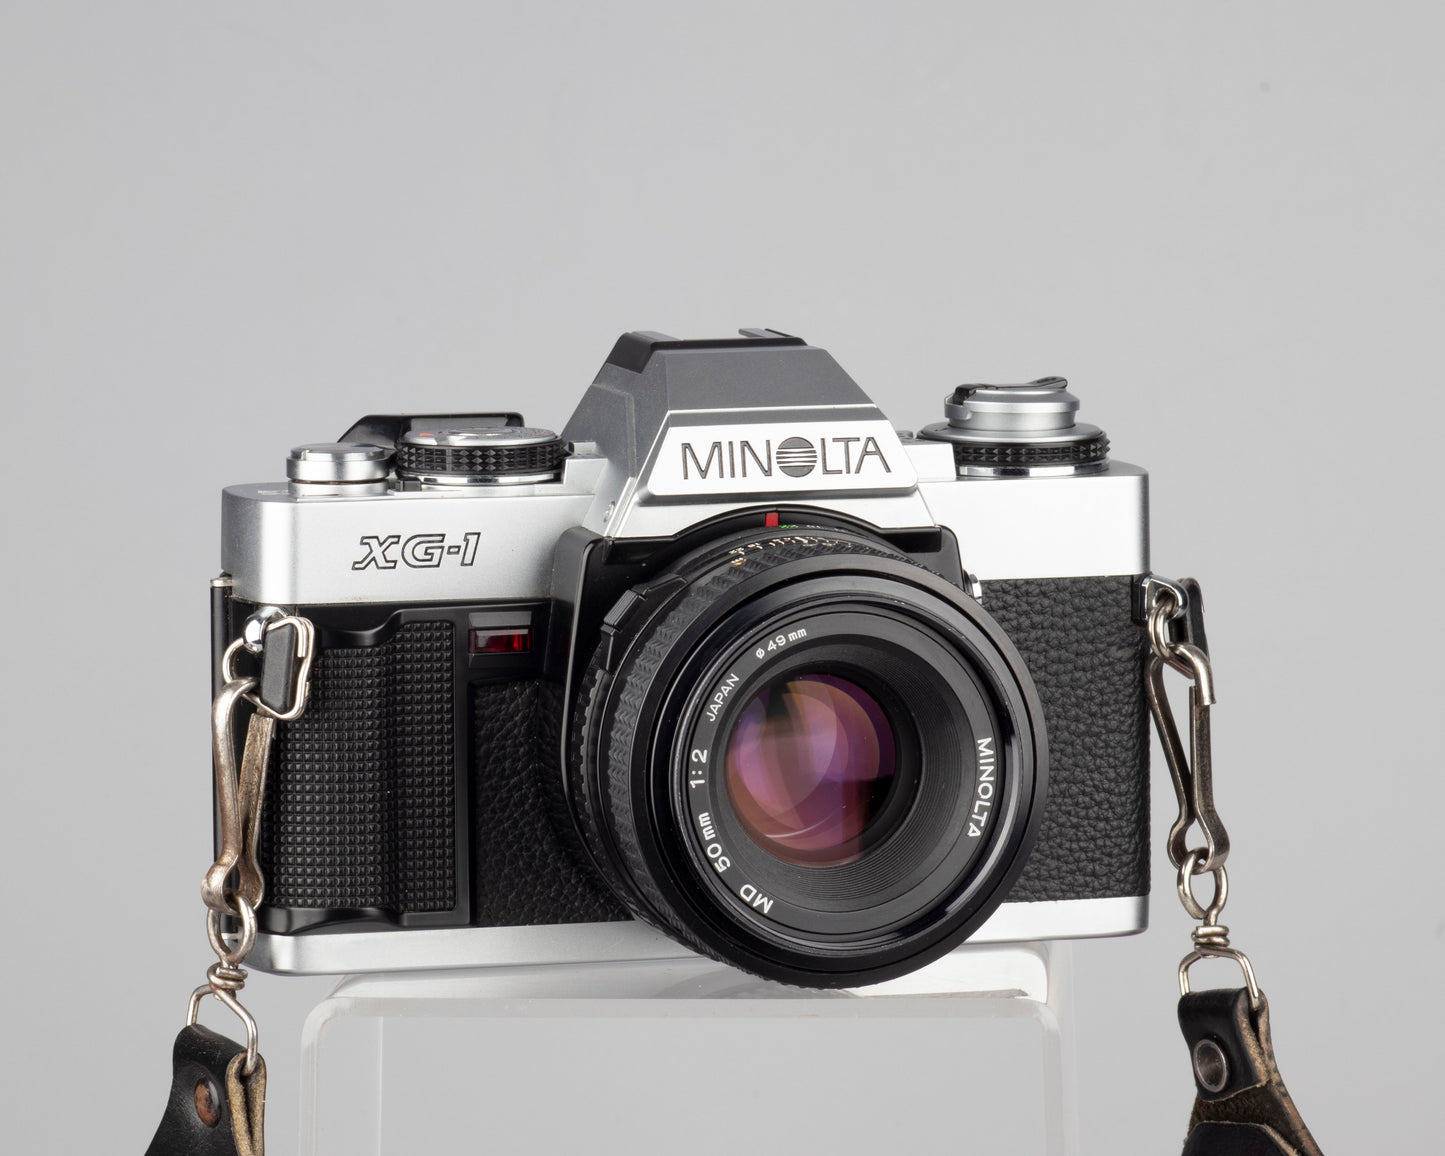 The Minolta XG-1n is a 35mm SLR camera first released in 1982. This camera features aperture priority auto-exposure.